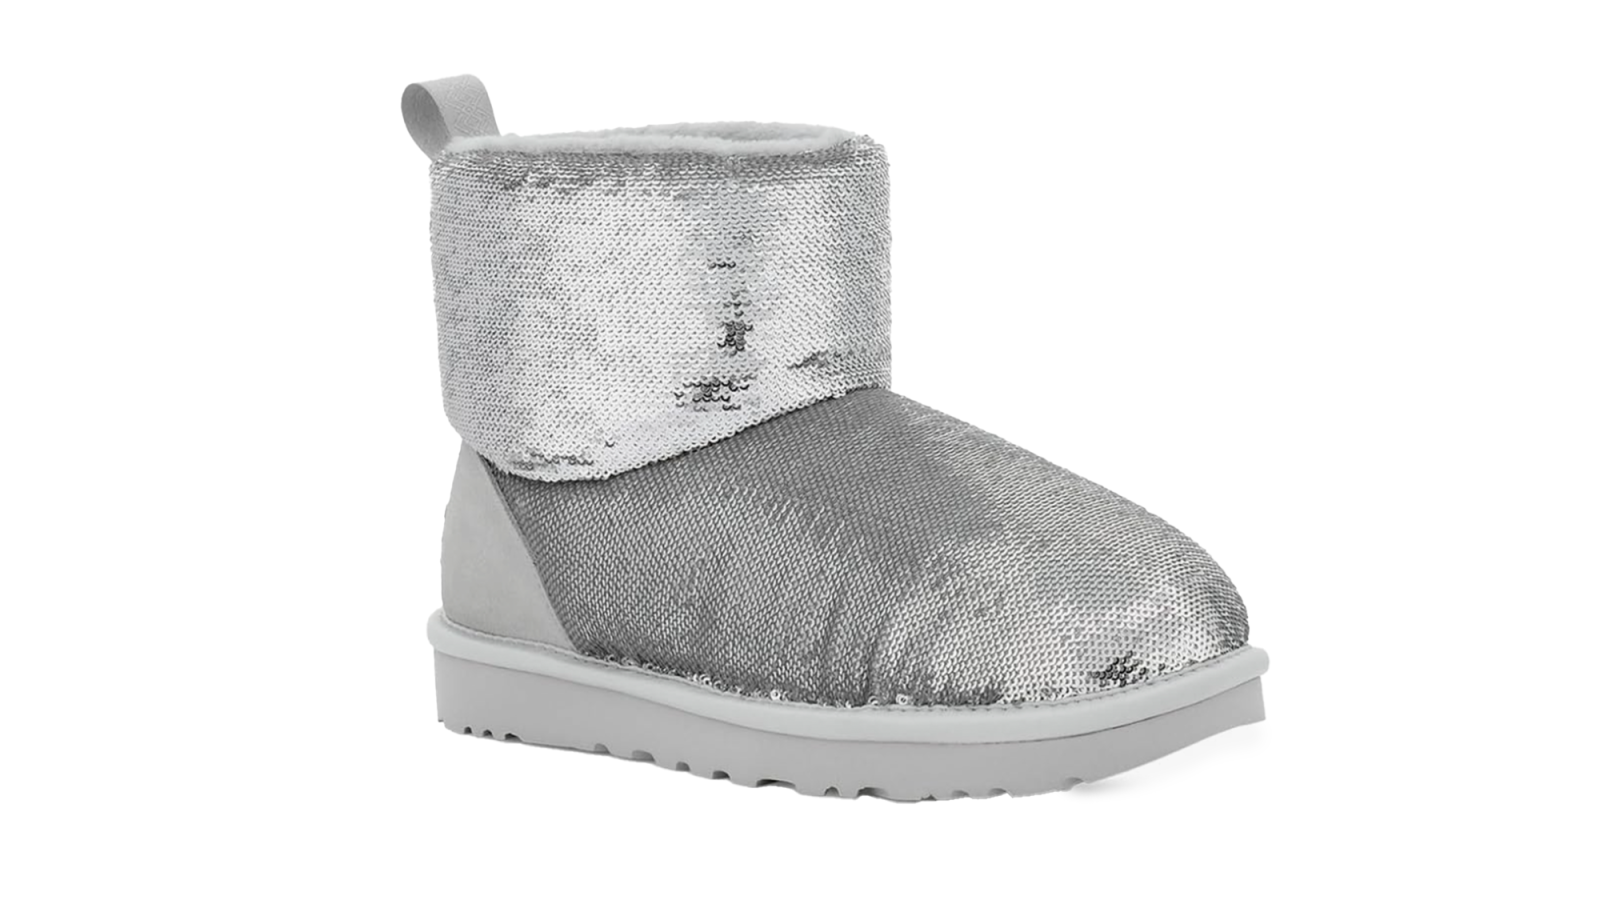 https://www.usmagazine.com/wp-content/uploads/2024/01/Ugg-sequin-boot.png?crop=0px%2C109px%2C2000px%2C1131px&resize=1600%2C900&quality=86&strip=all